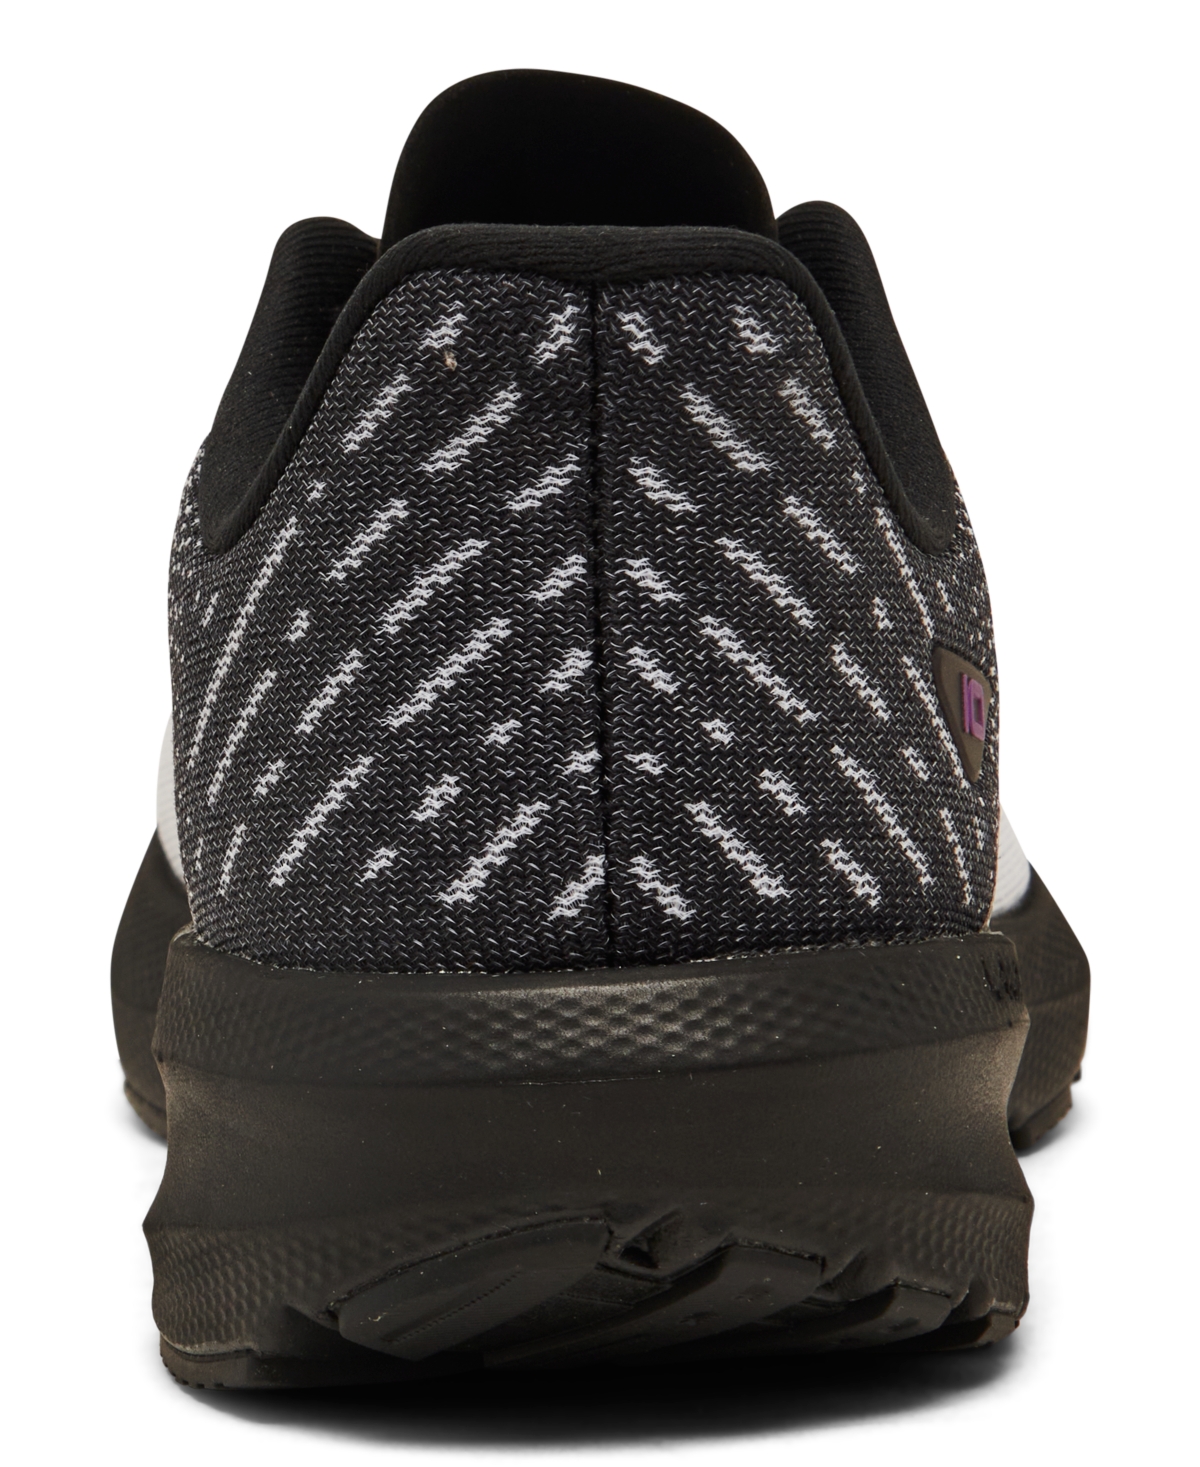 Shop Brooks Women's Launch 10 Running Sneakers From Finish Line In Black,white,violet